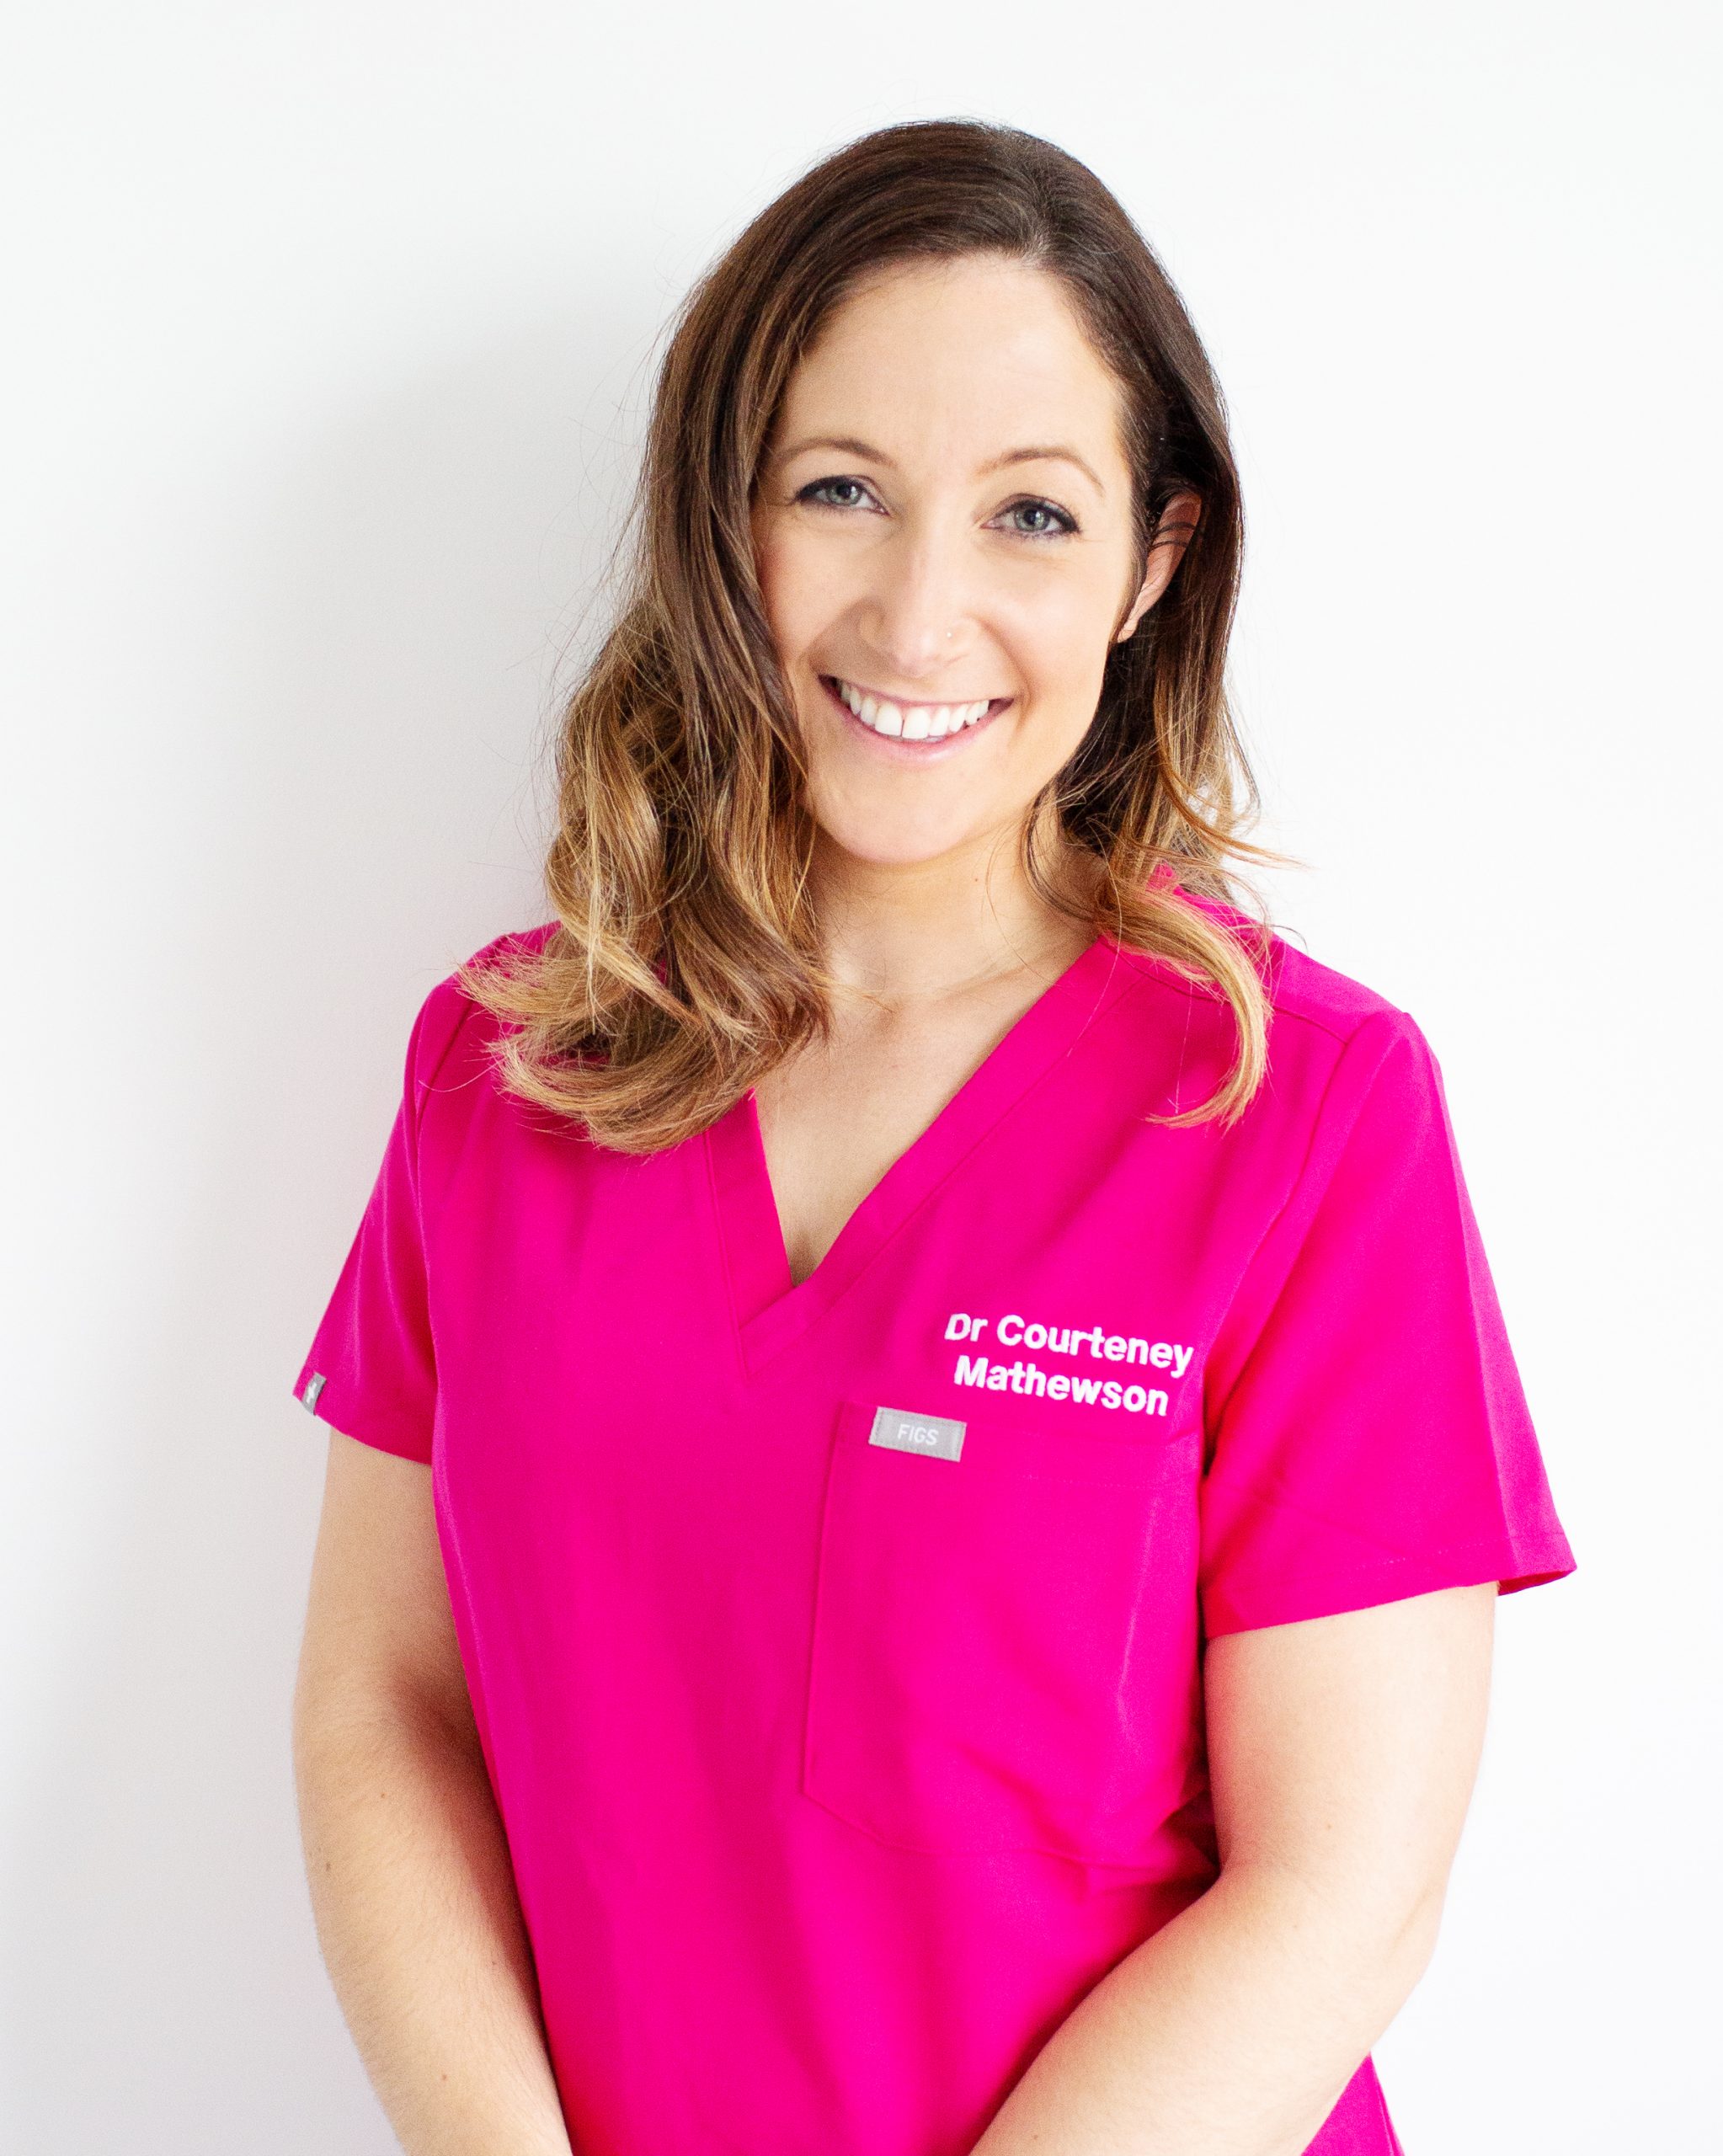 Dr Courteney Mathewson. Face on, pink scrubs, long brown hair curled. Smiling, friendly, empathetic, medical, understanding. Safe and professional.